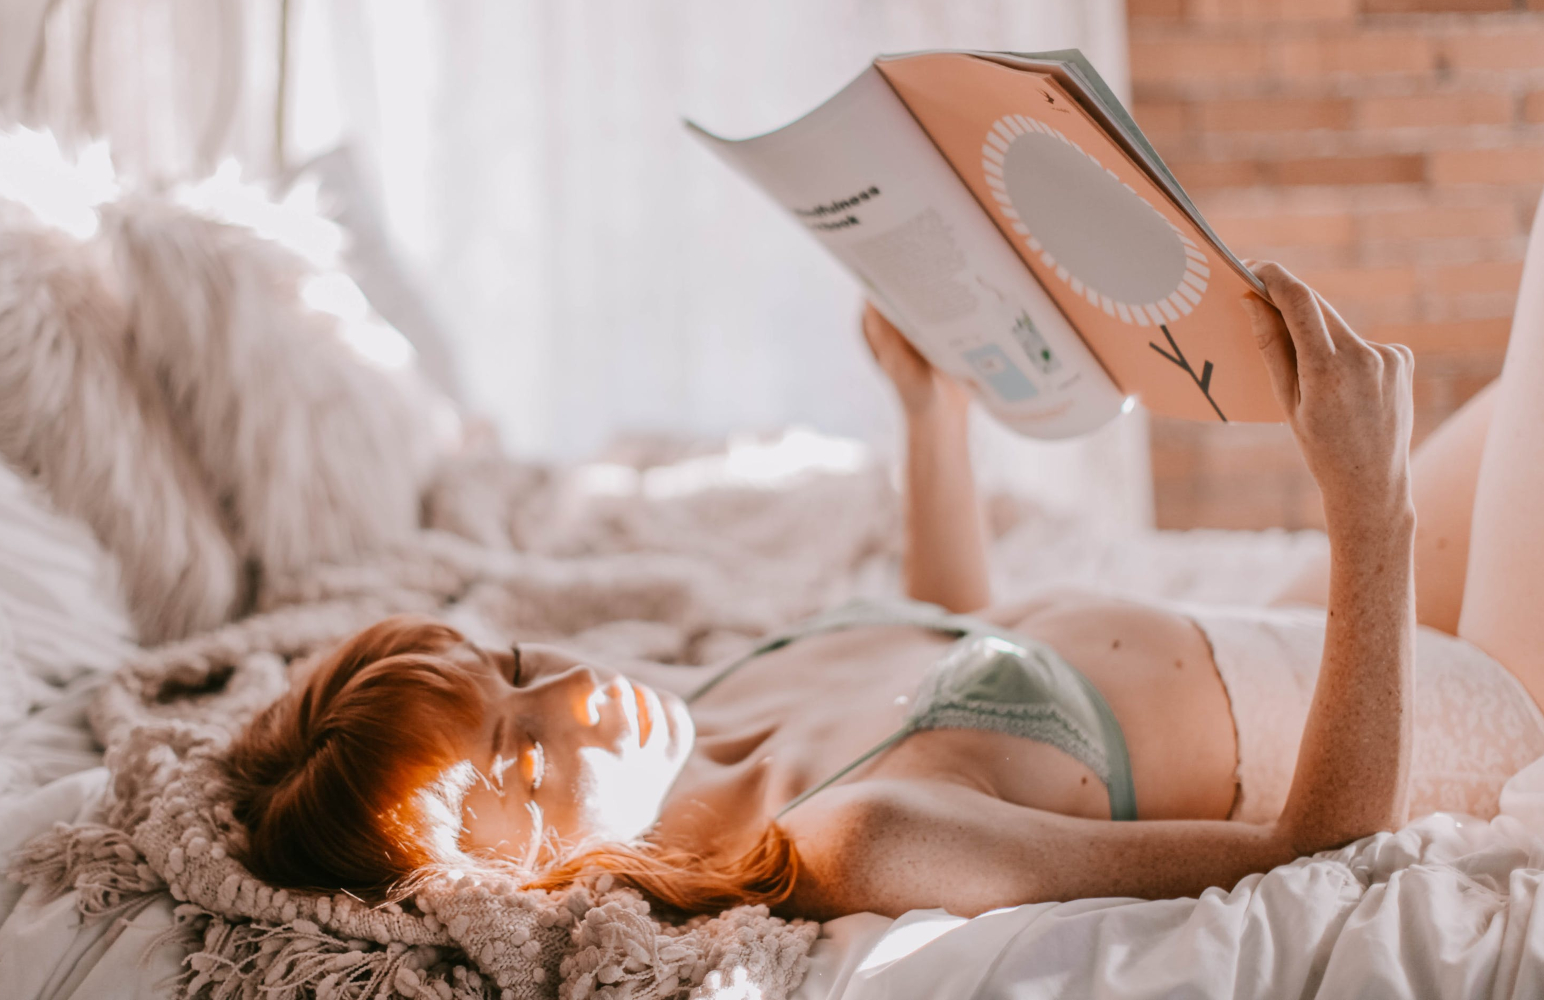 ginger woman in blue bralette is posing with magazine on a bed